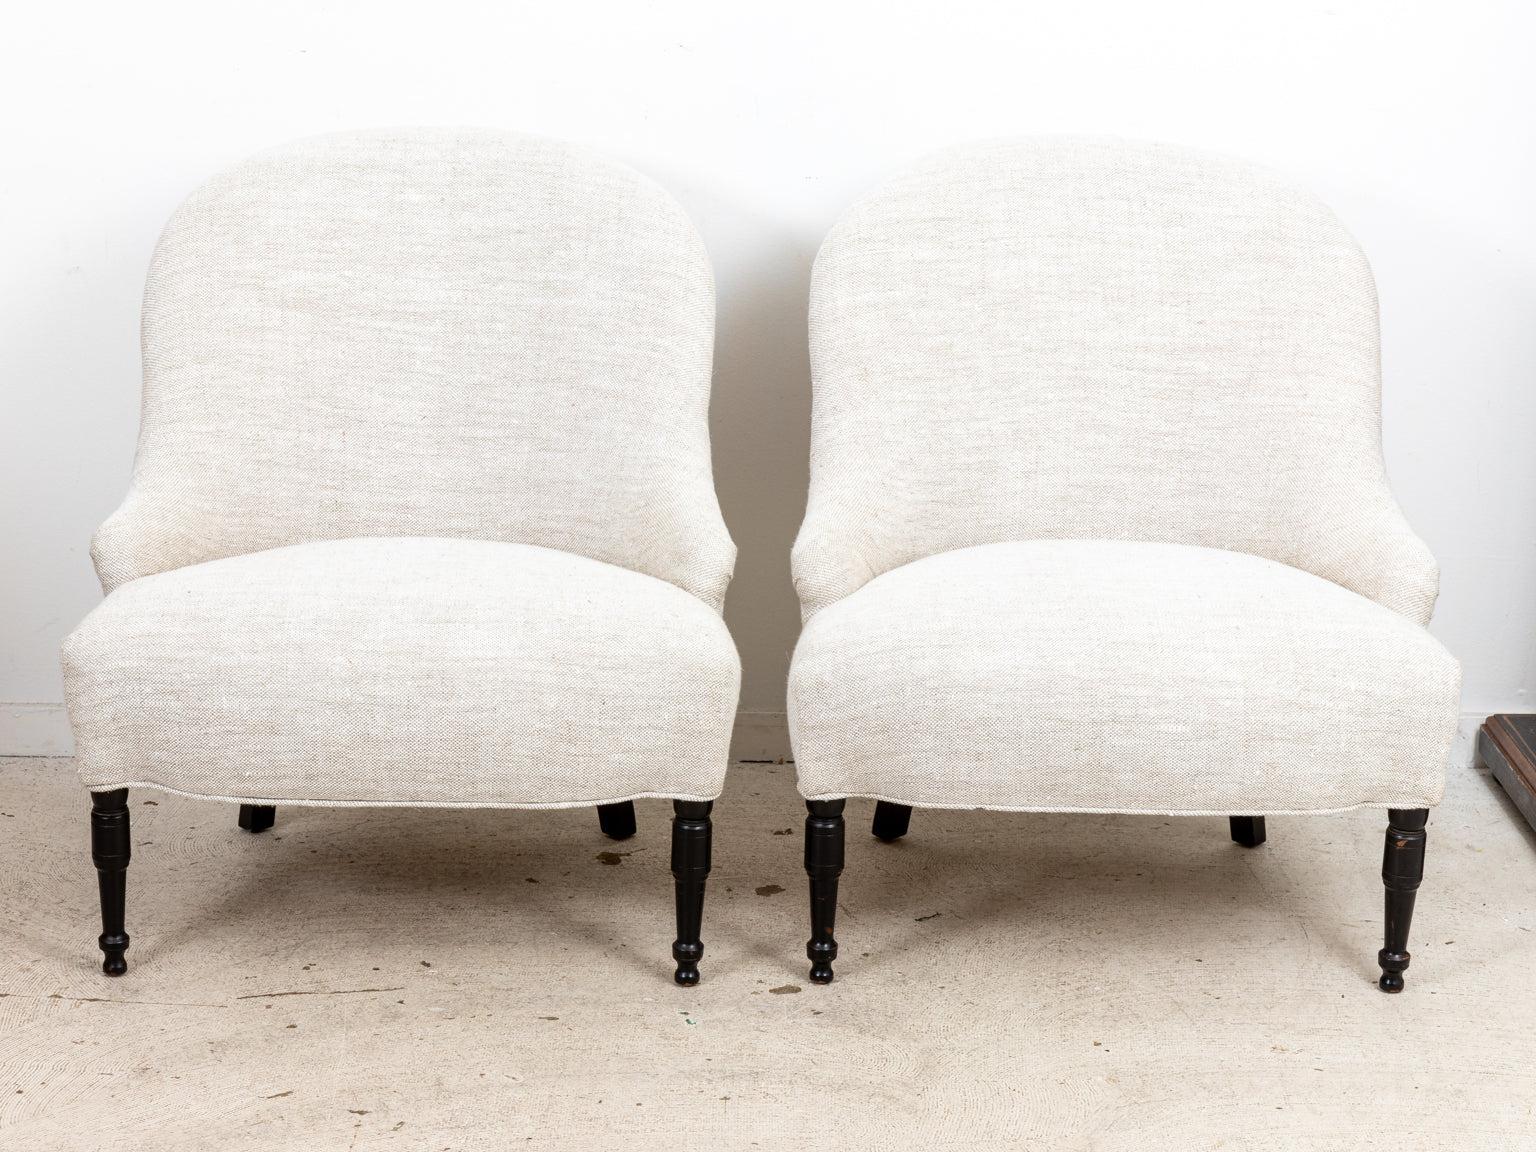 Circa 1940s pair of vintage English Country style decorated chairs with rounded seat backs, freshly upholstered in heavy linen. The chairs are also supported by ball turned, black ebonized legs. Please note of wear consistent with age.